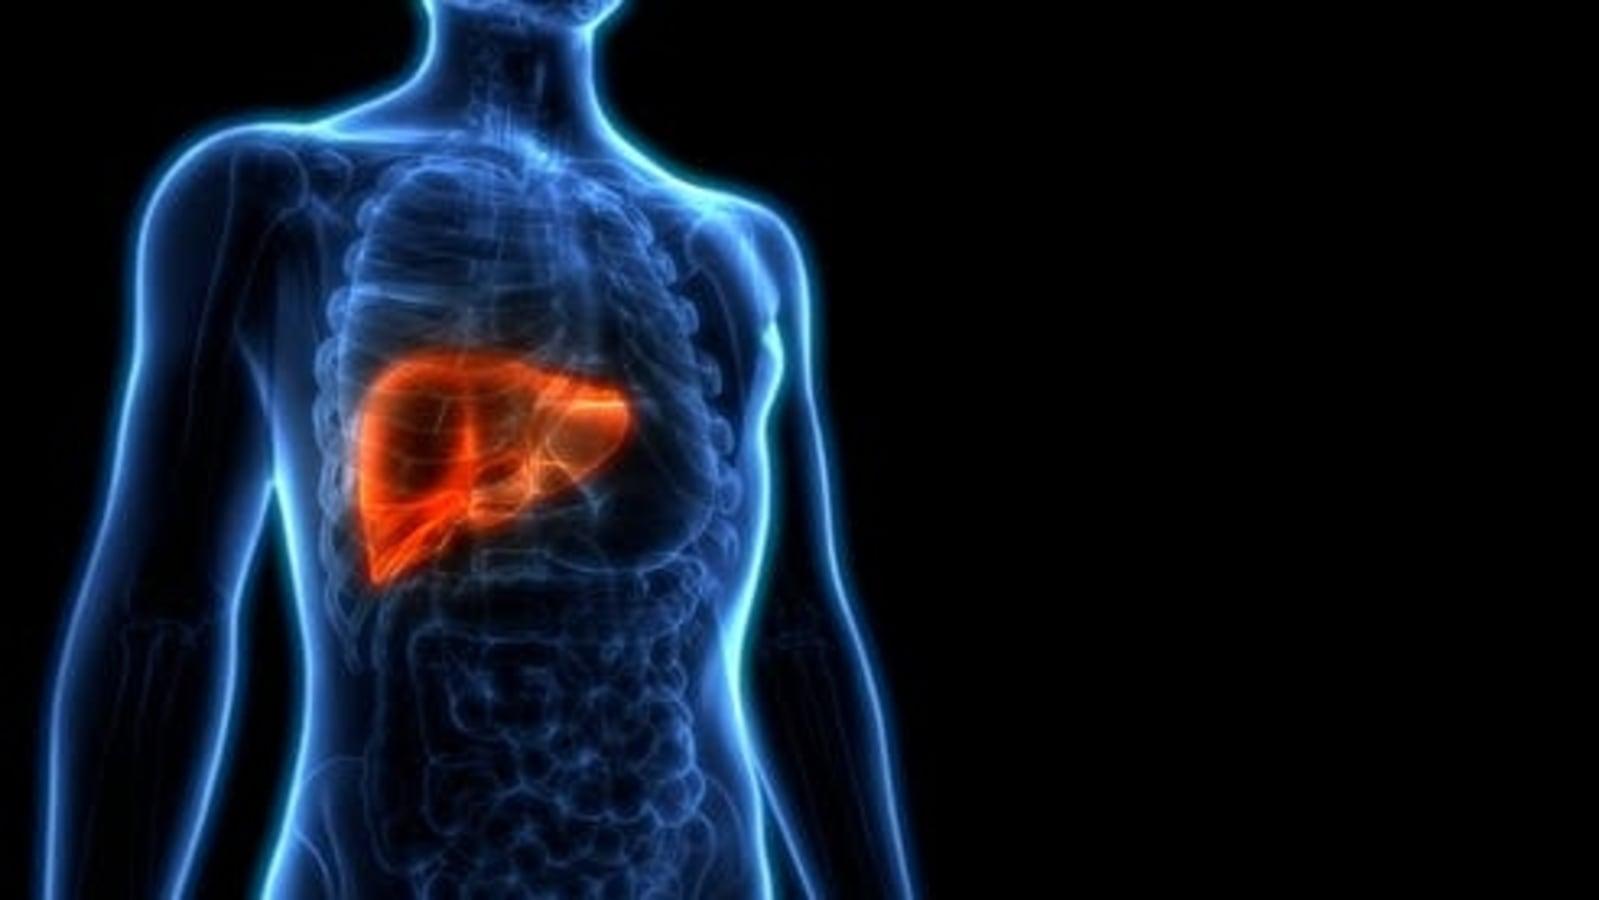 If you want to keep your liver healthy, what should you eat and what should you avoid?